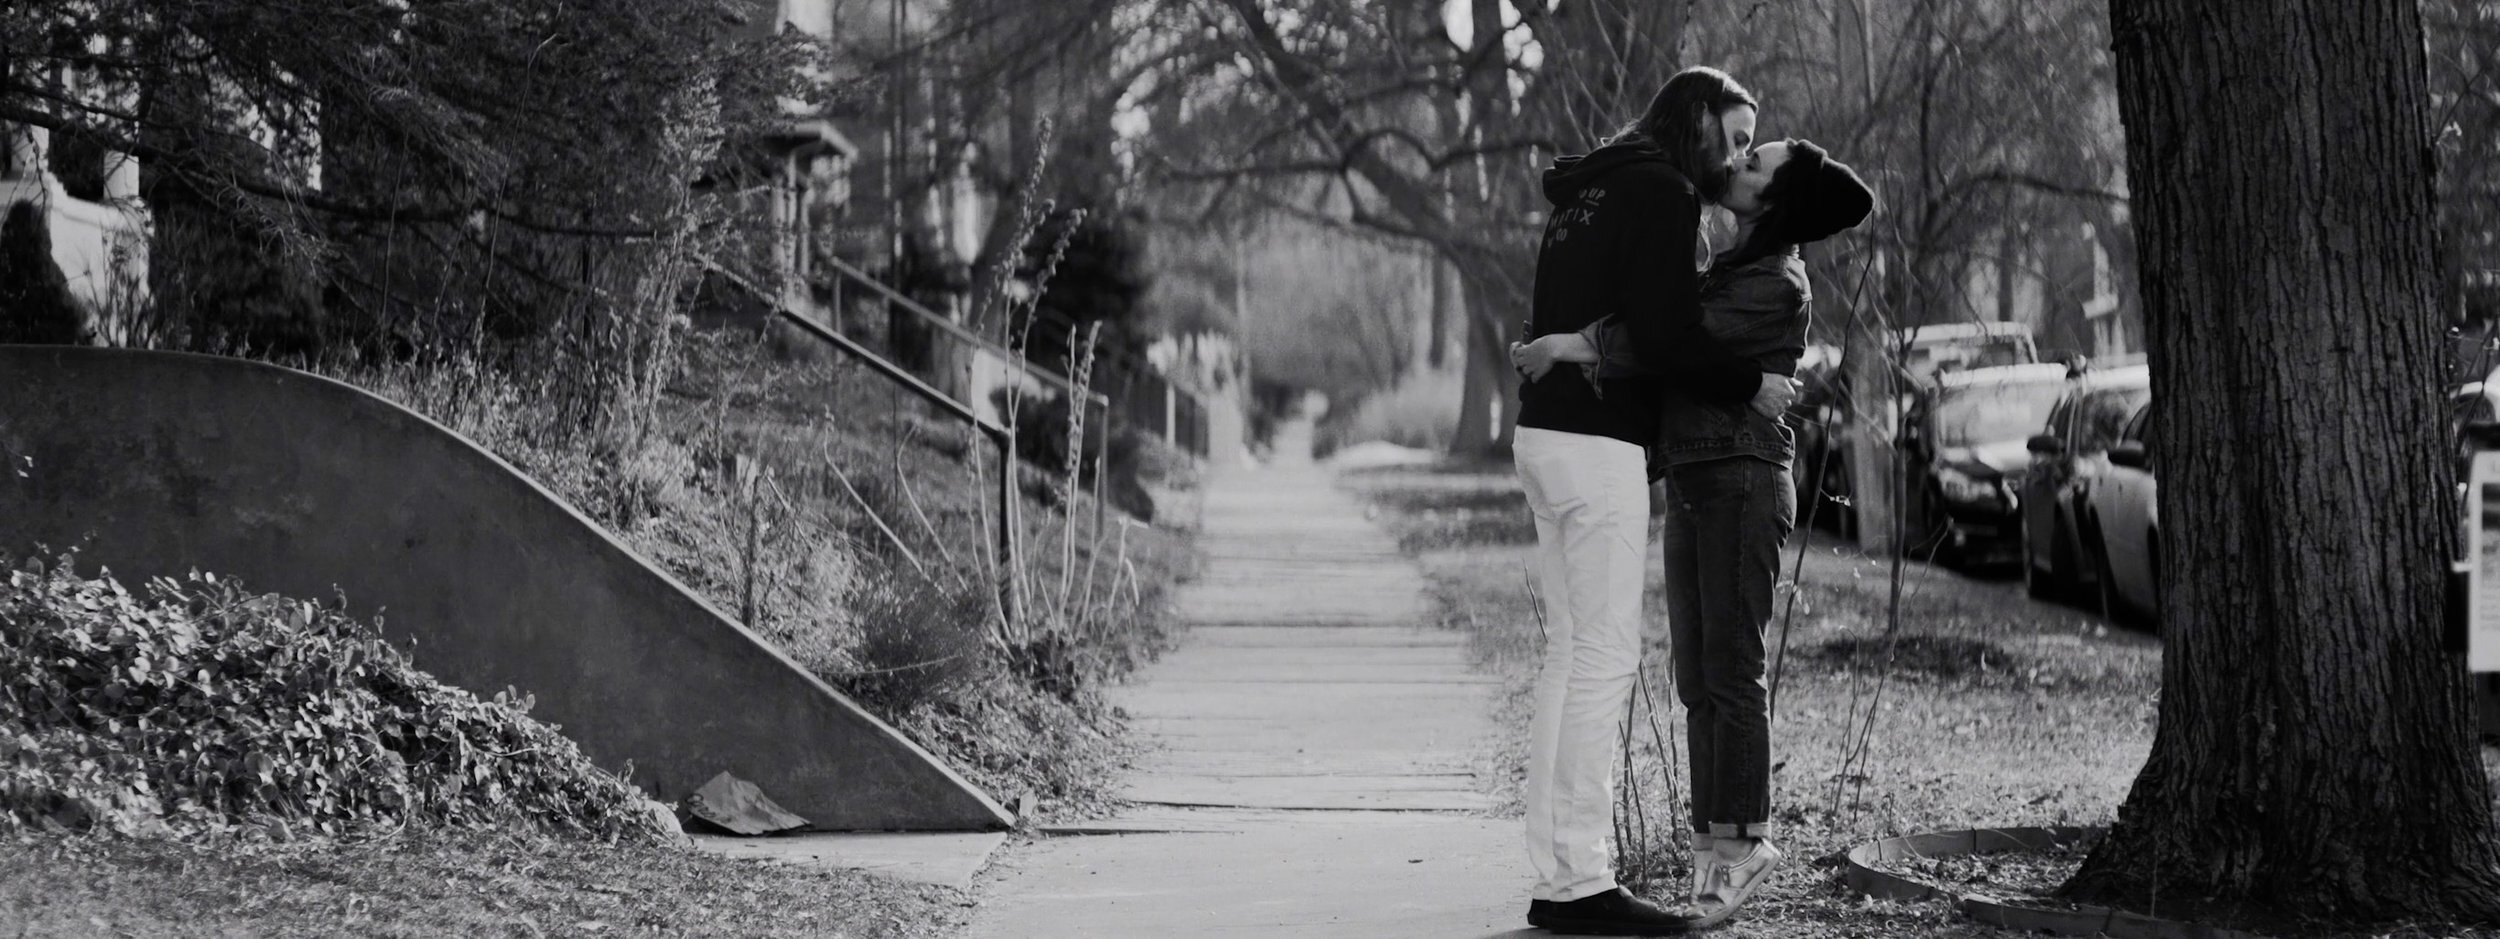  A couple experiments with opening up their relationship to other people. A film by Joshua LaBure &amp; Zachary Gutierrez. 